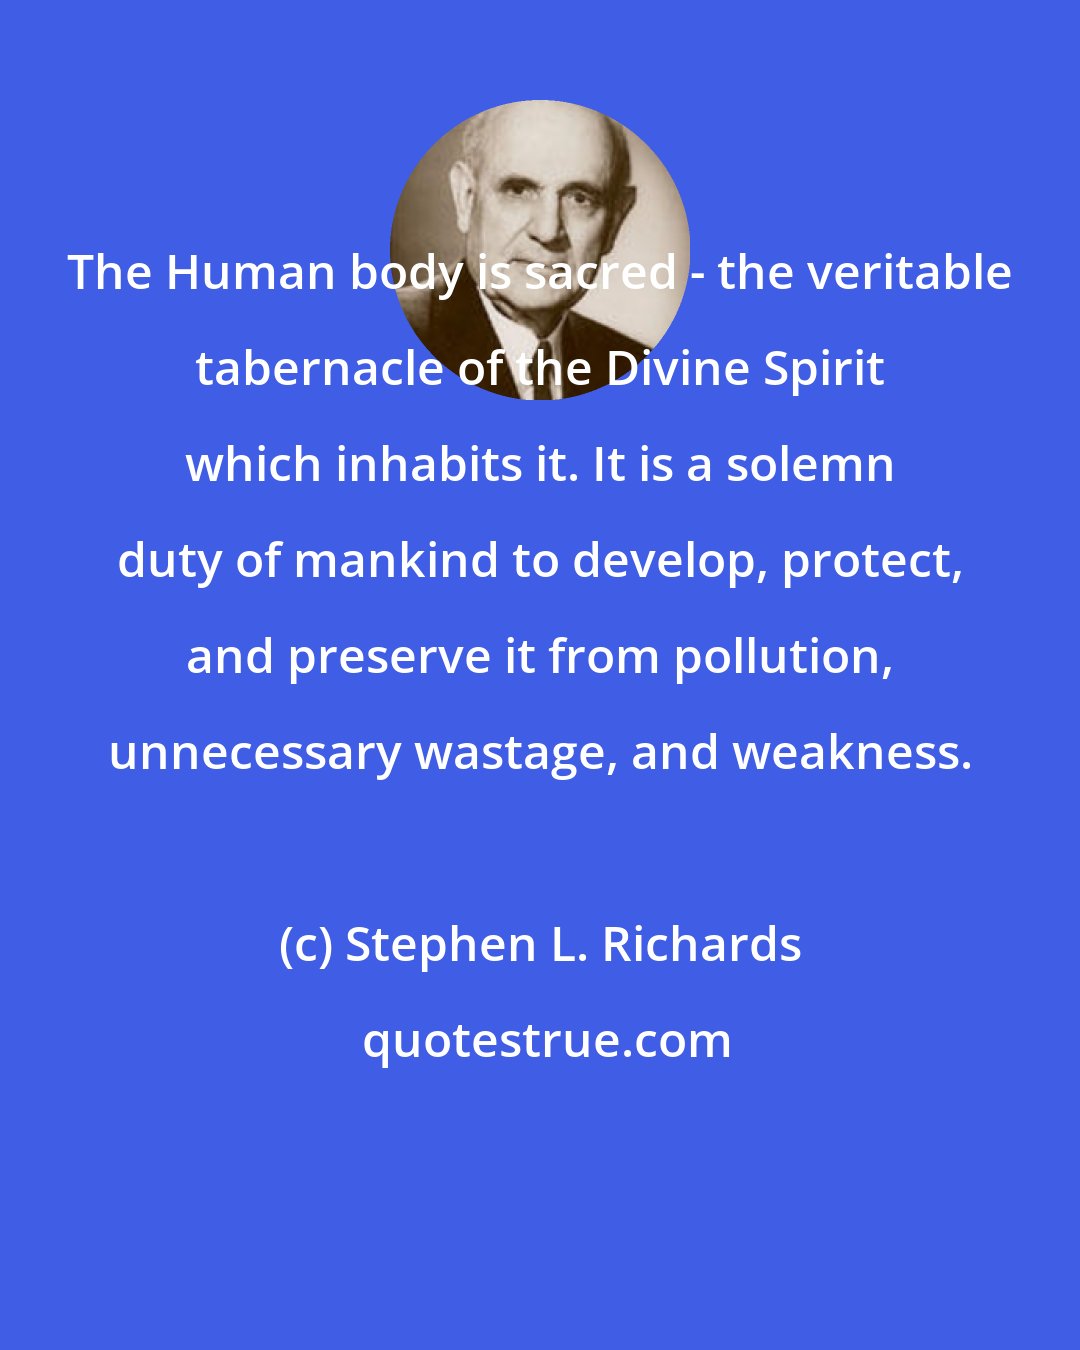 Stephen L. Richards: The Human body is sacred - the veritable tabernacle of the Divine Spirit which inhabits it. It is a solemn duty of mankind to develop, protect, and preserve it from pollution, unnecessary wastage, and weakness.